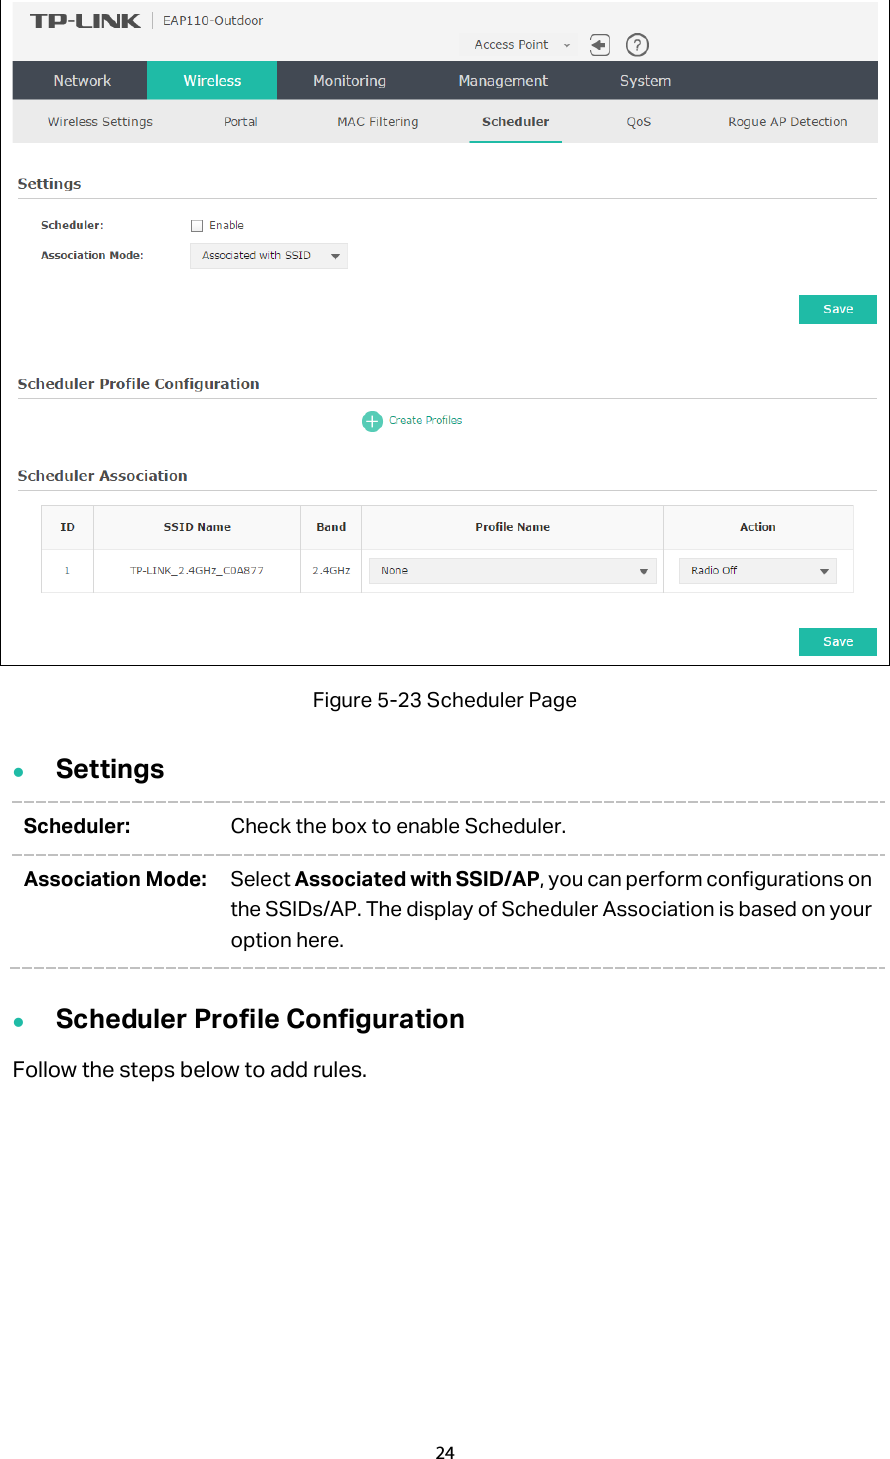  Figure 5-23 Scheduler Page  Settings Scheduler: Check the box to enable Scheduler. Association Mode: Select Associated with SSID/AP, you can perform configurations on the SSIDs/AP. The display of Scheduler Association is based on your option here.    Scheduler Profile Configuration Follow the steps below to add rules. 24  